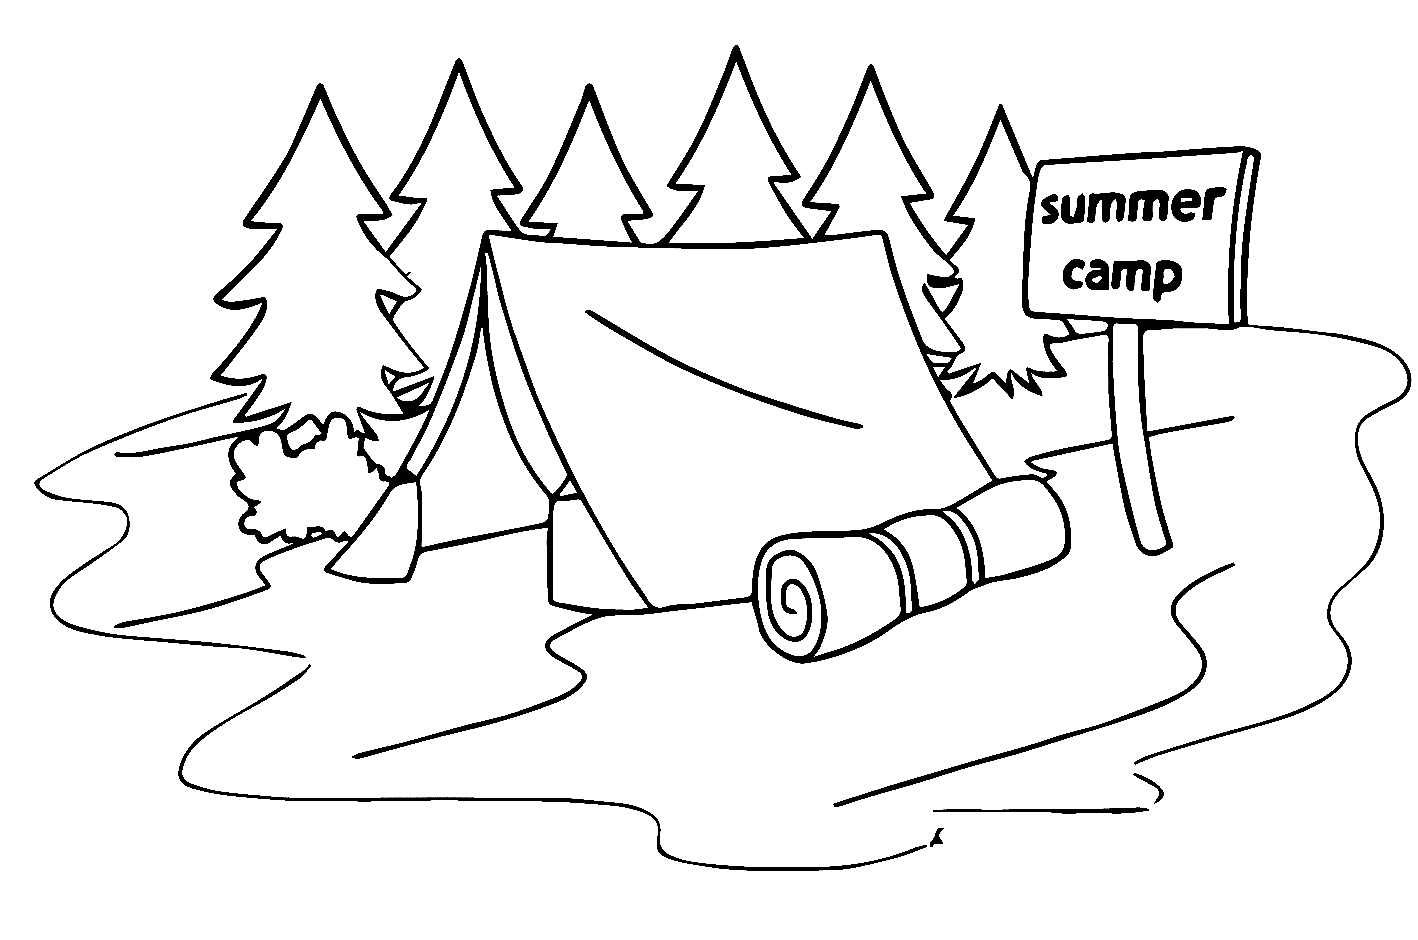 Summer Camp Tent Coloring Page